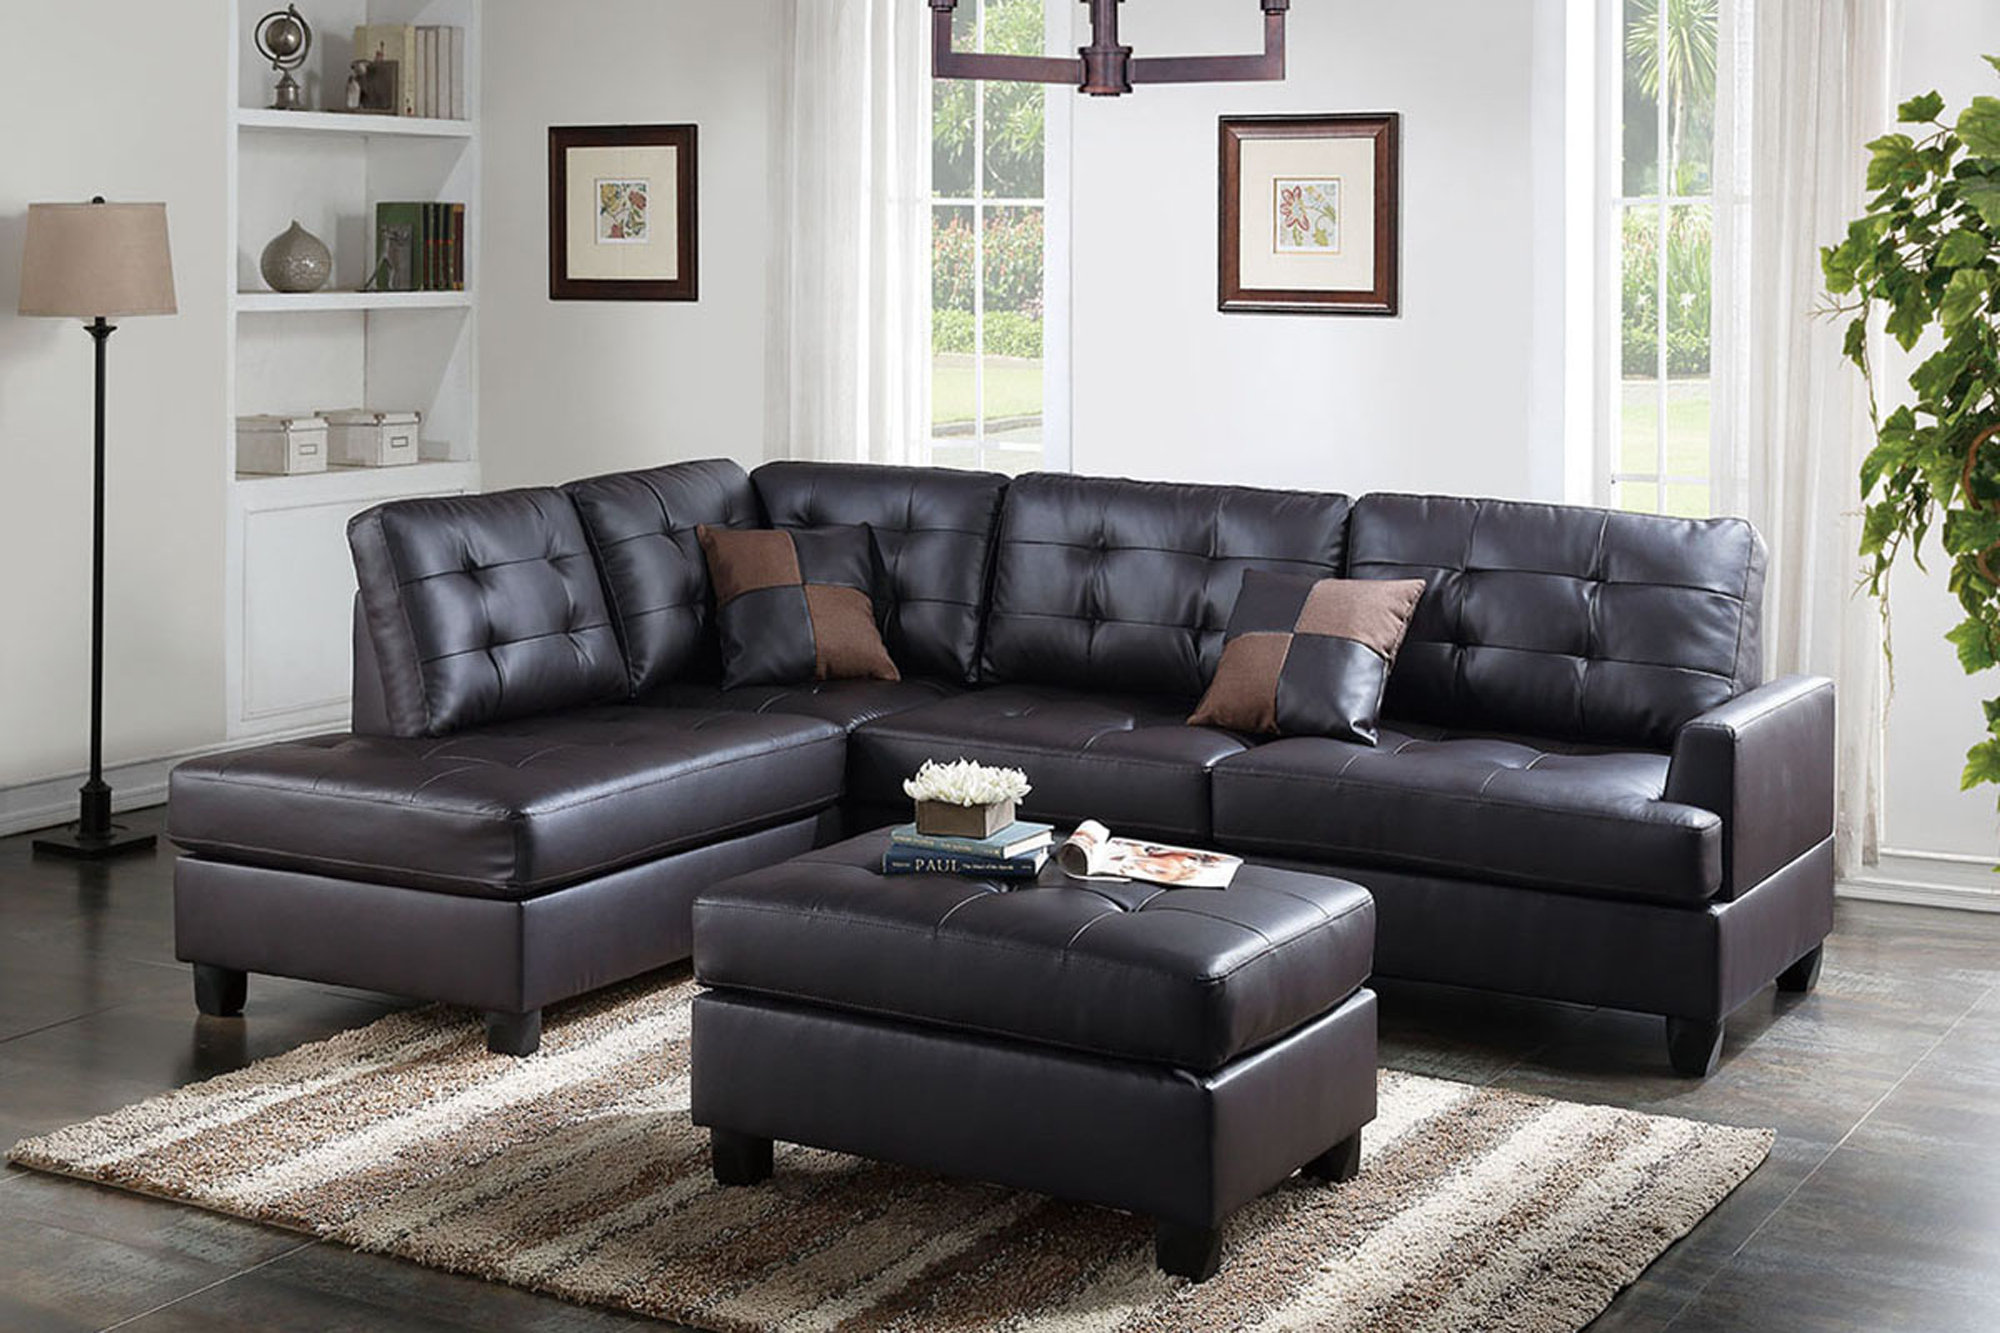 Giuliana 104″ Wide Faux Leather Reversible Sofa & Chaise with Ottoman